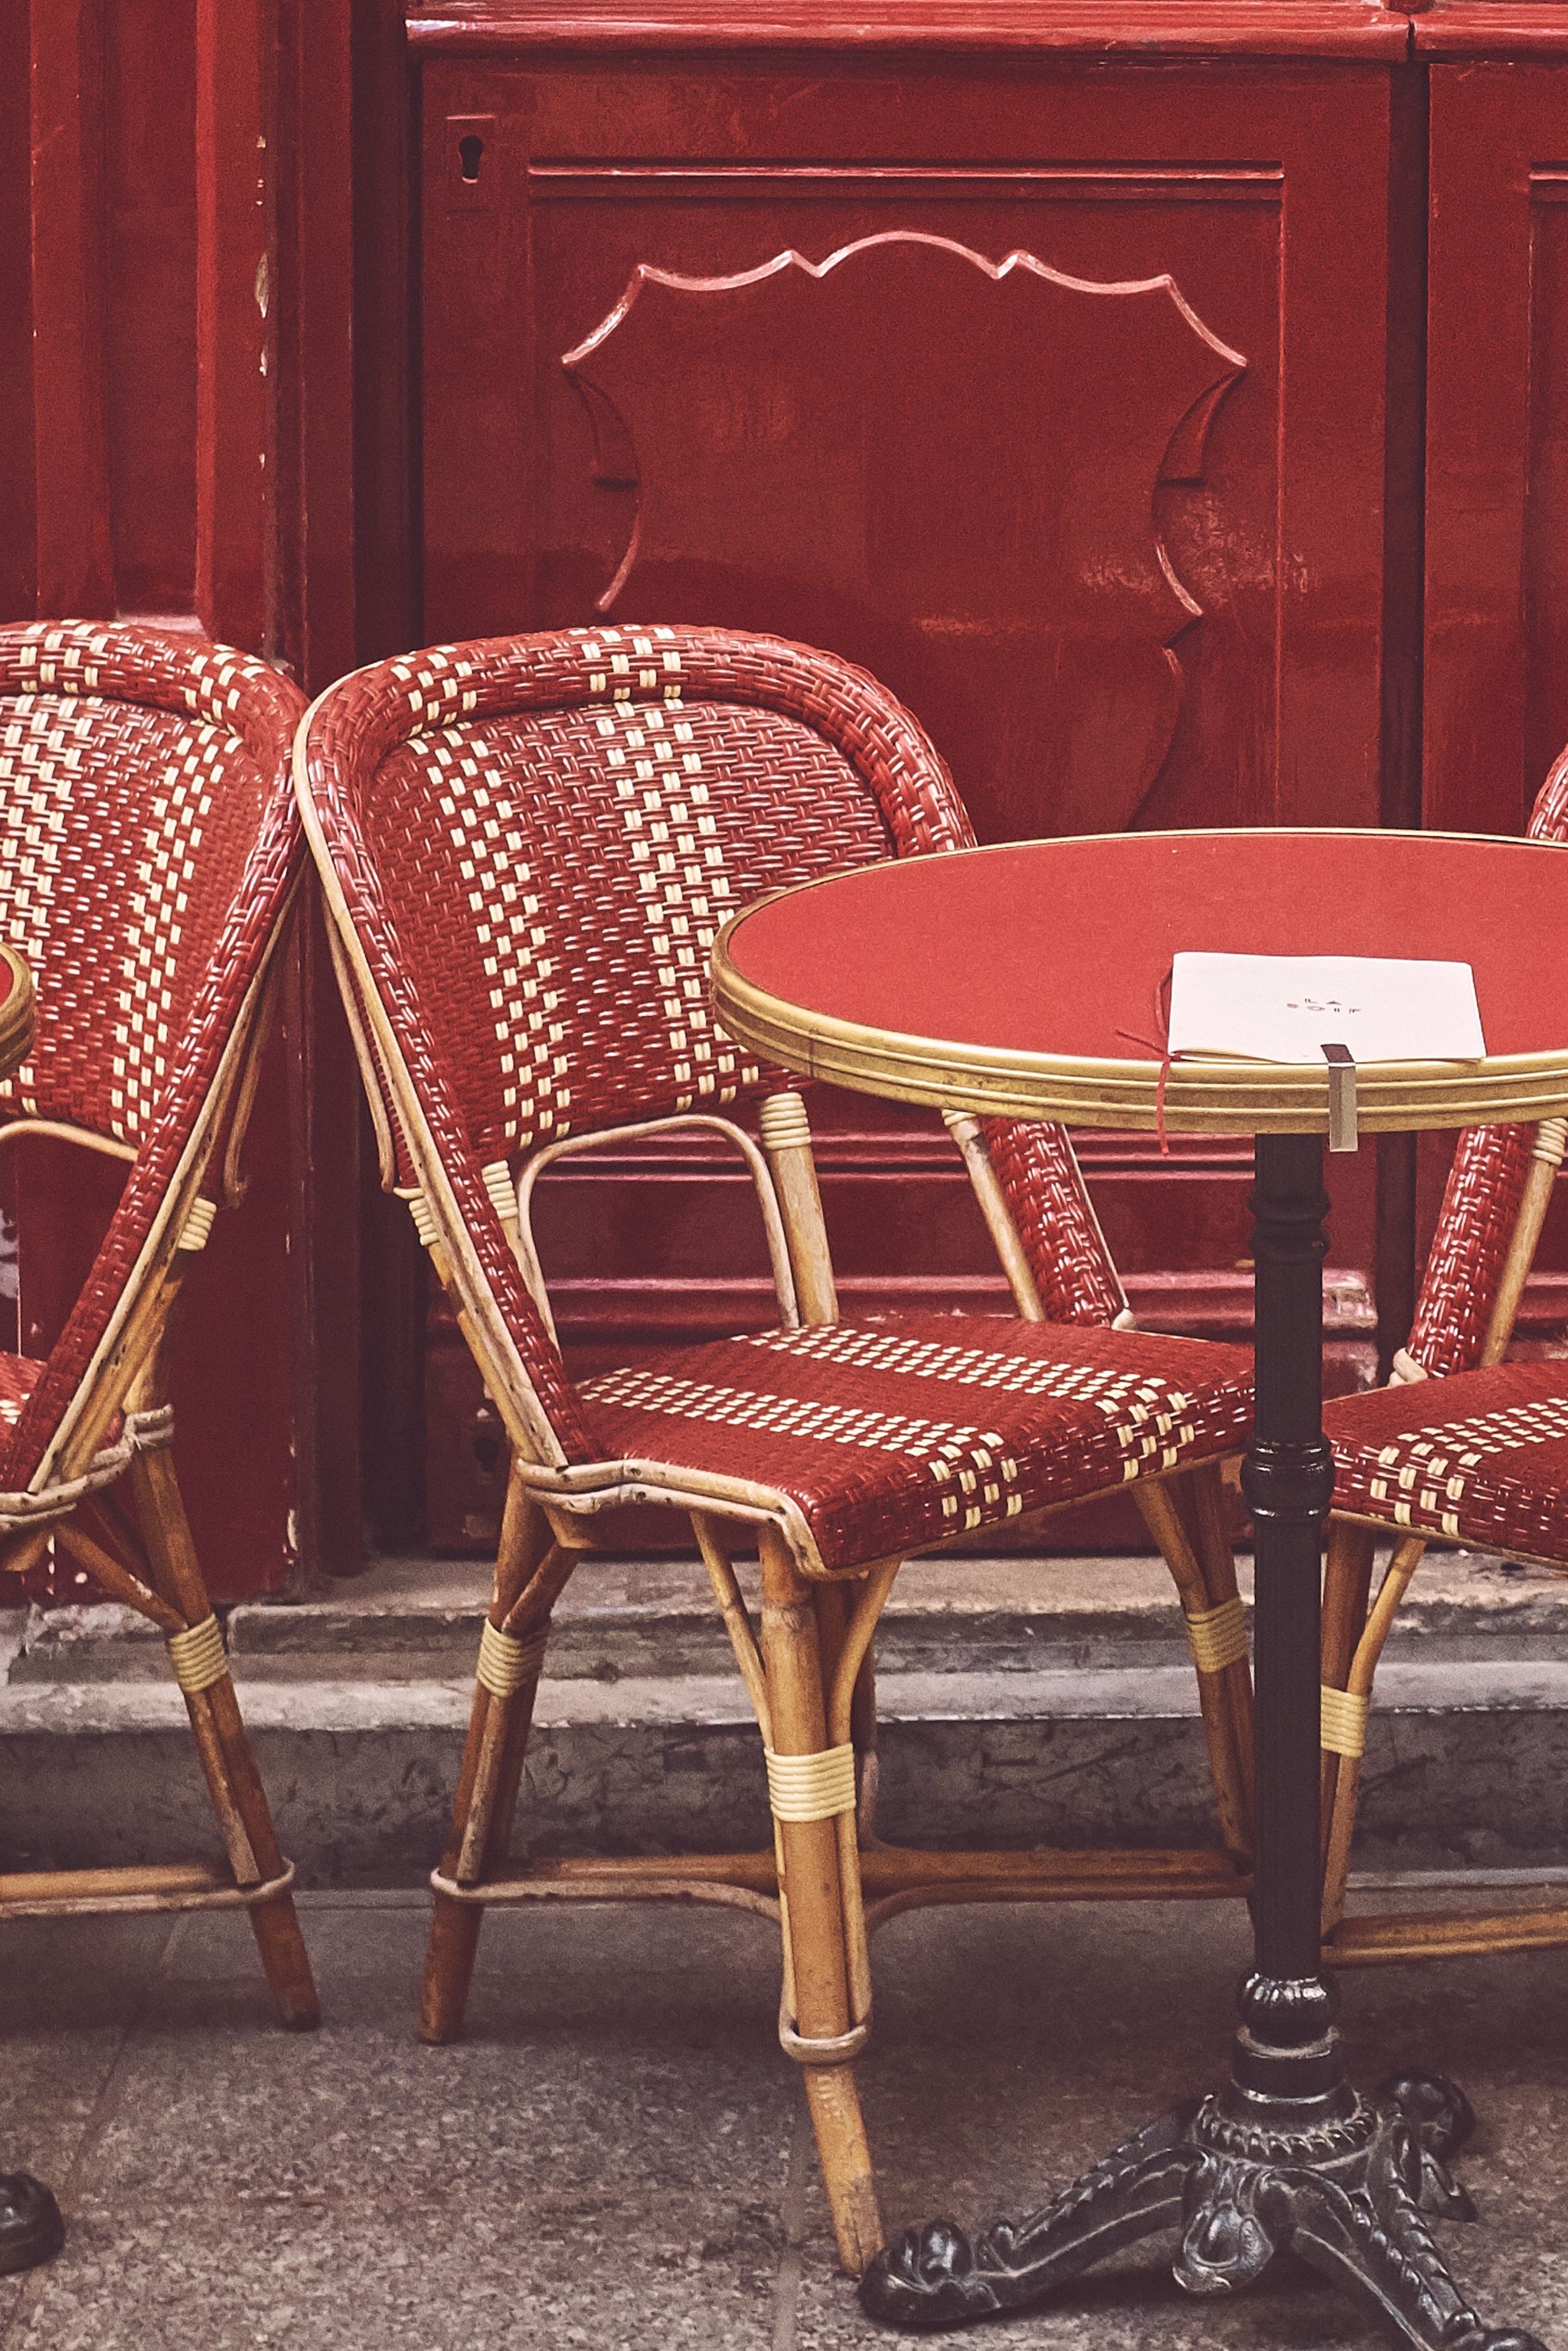 Chair, Furniture, Red, Table, Room, Wood, Classic, Wicker, Interior design, Outdoor furniture, 